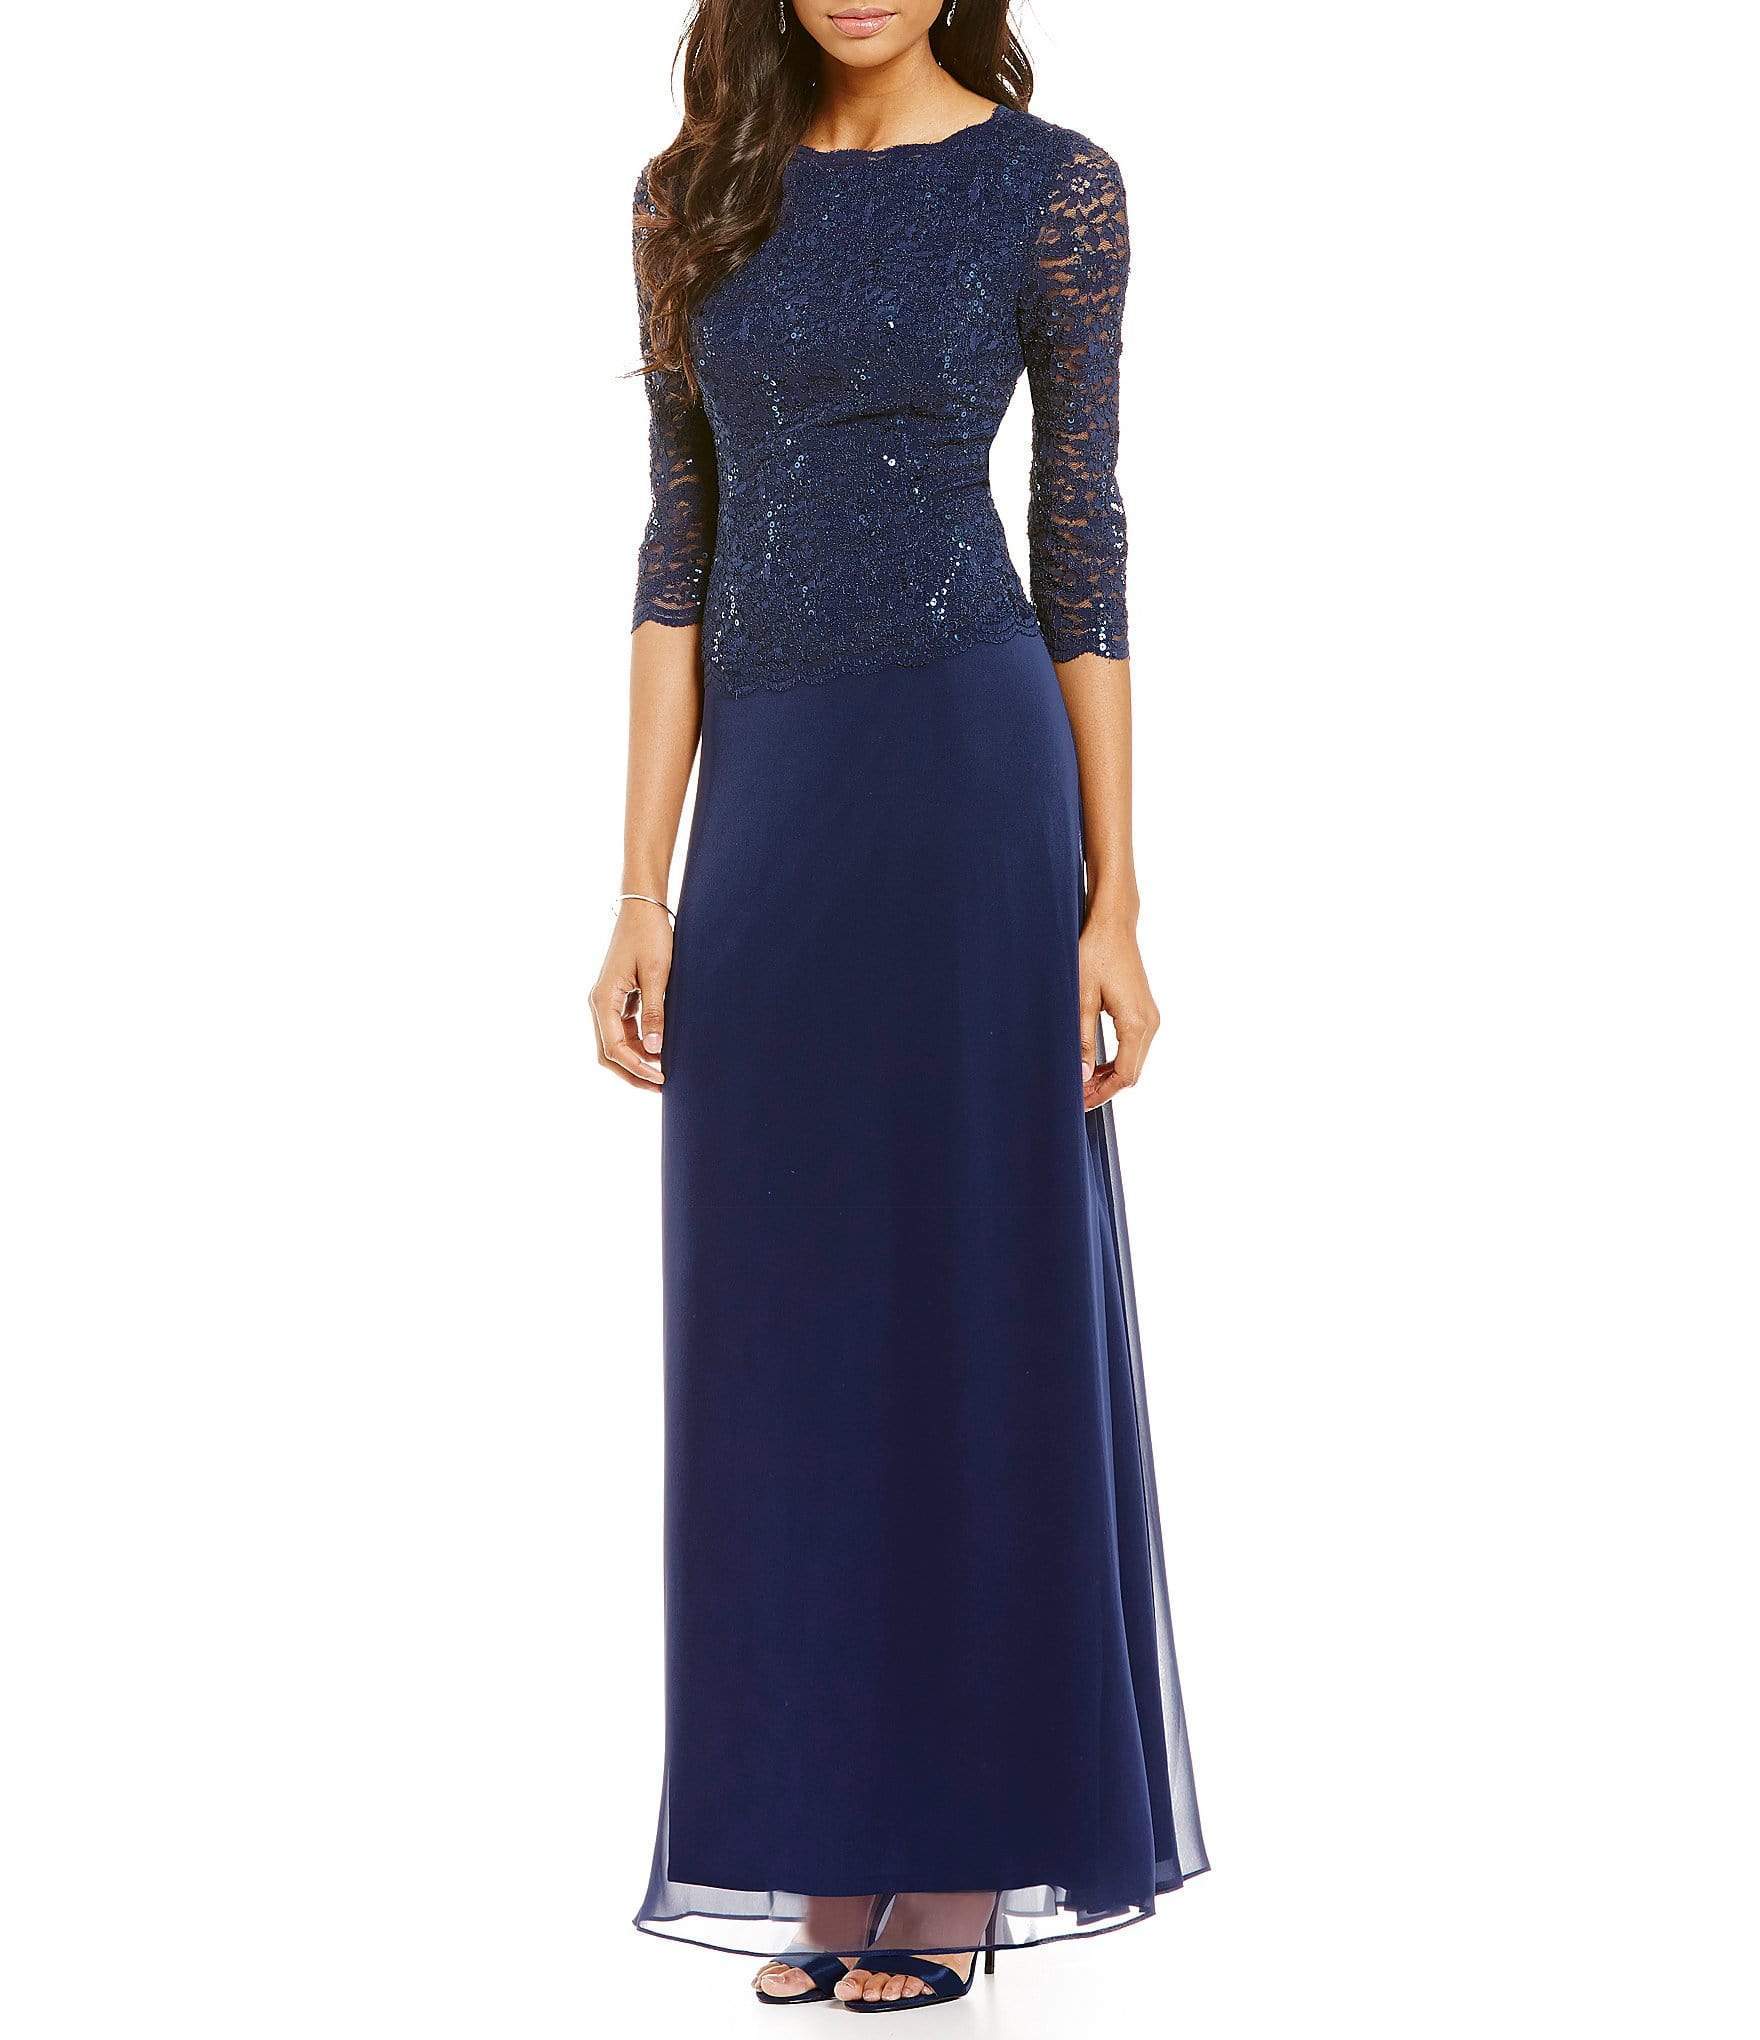 Image of Alex Evenings - 212318 Quarter Sleeve Sparkly Lace and Chiffon Dress